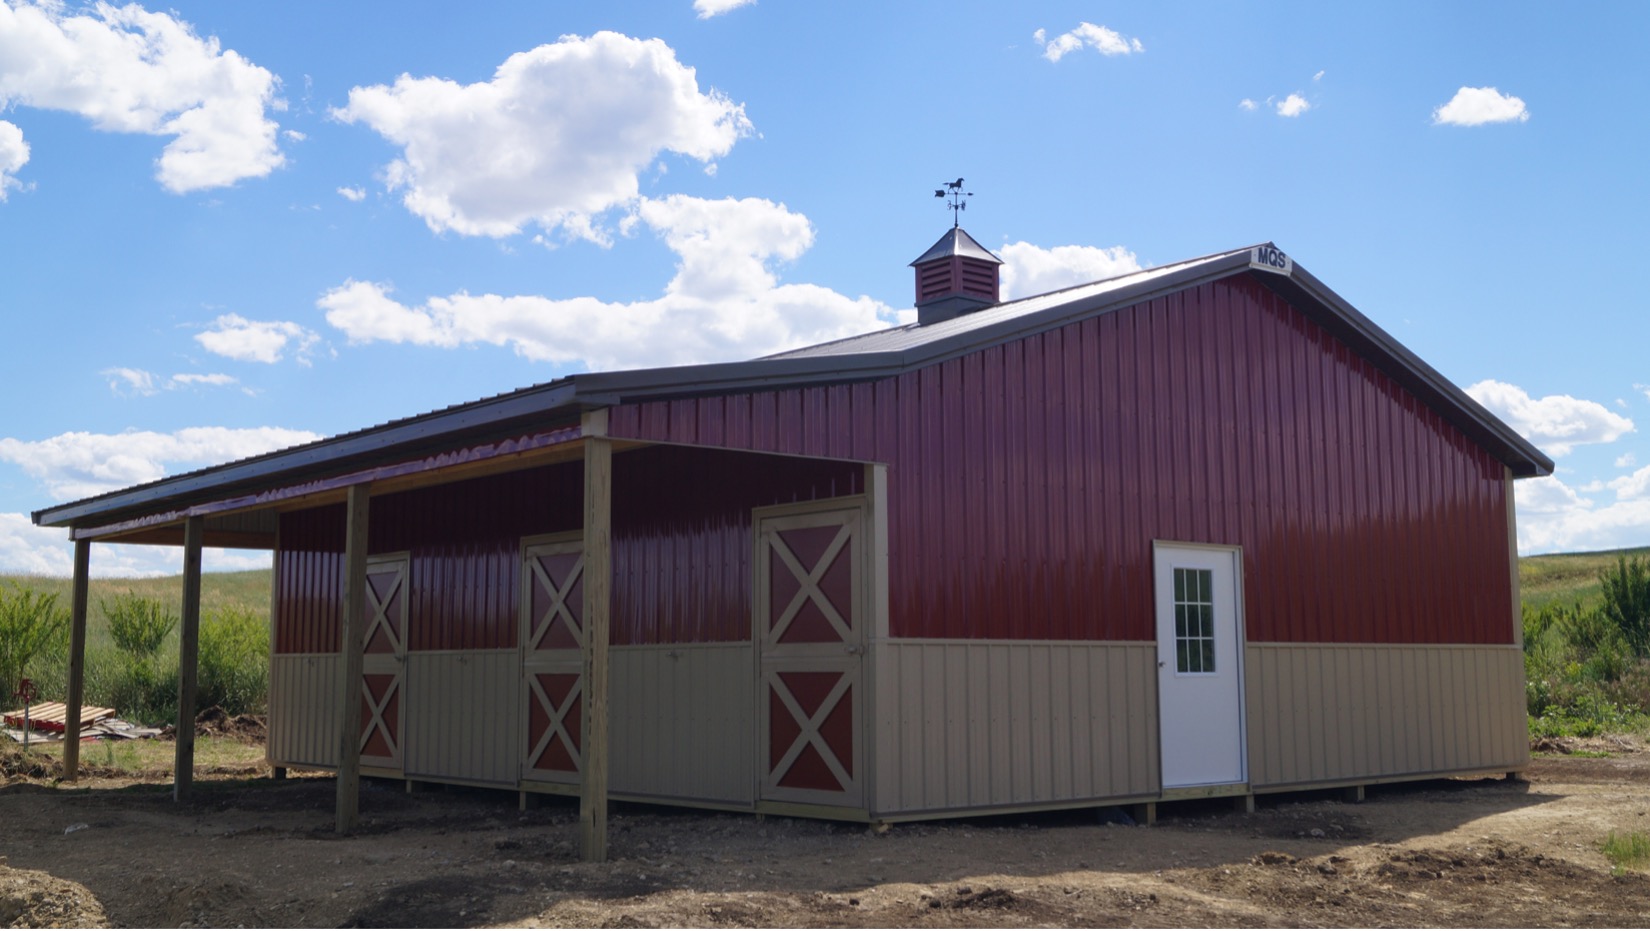 5 Reasons to Skip the Concrete Floor in Your New Pole Barn